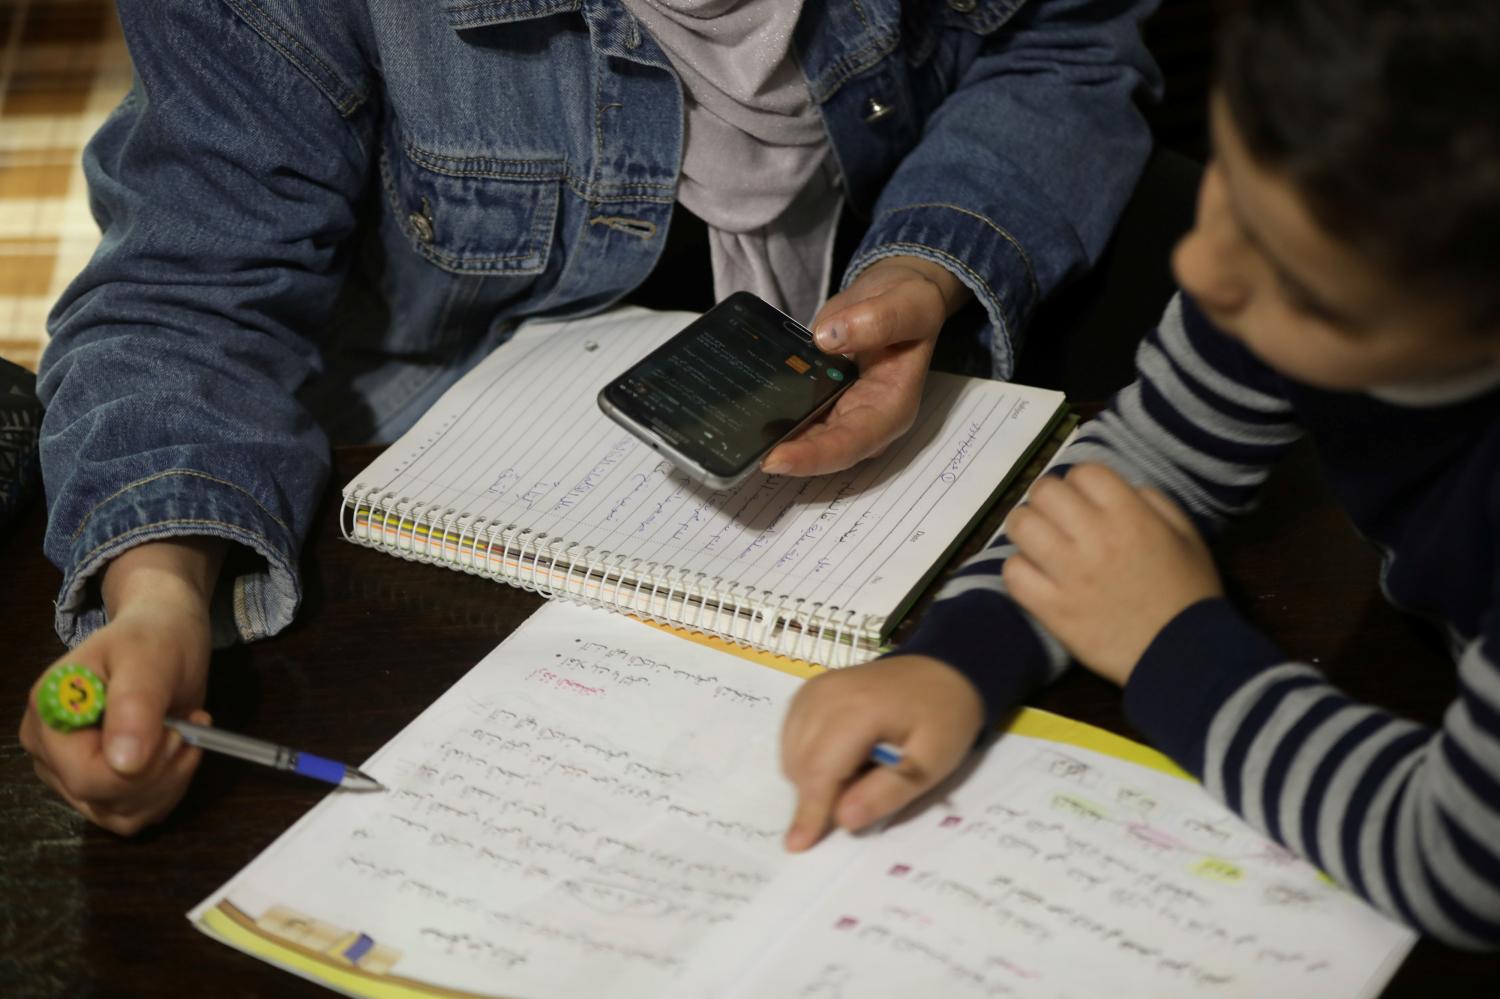 The parent of 8-year-old student Reem Al-Jaony helps her son with his school work at their home, after coronavirus lockdown forced schools to go online amid concerns over the spread of coronavirus disease (COVID-19), in Amman, Jordan March 23, 2020. Picture taken March 23, 2020. REUTERS/Muhammad Hamed